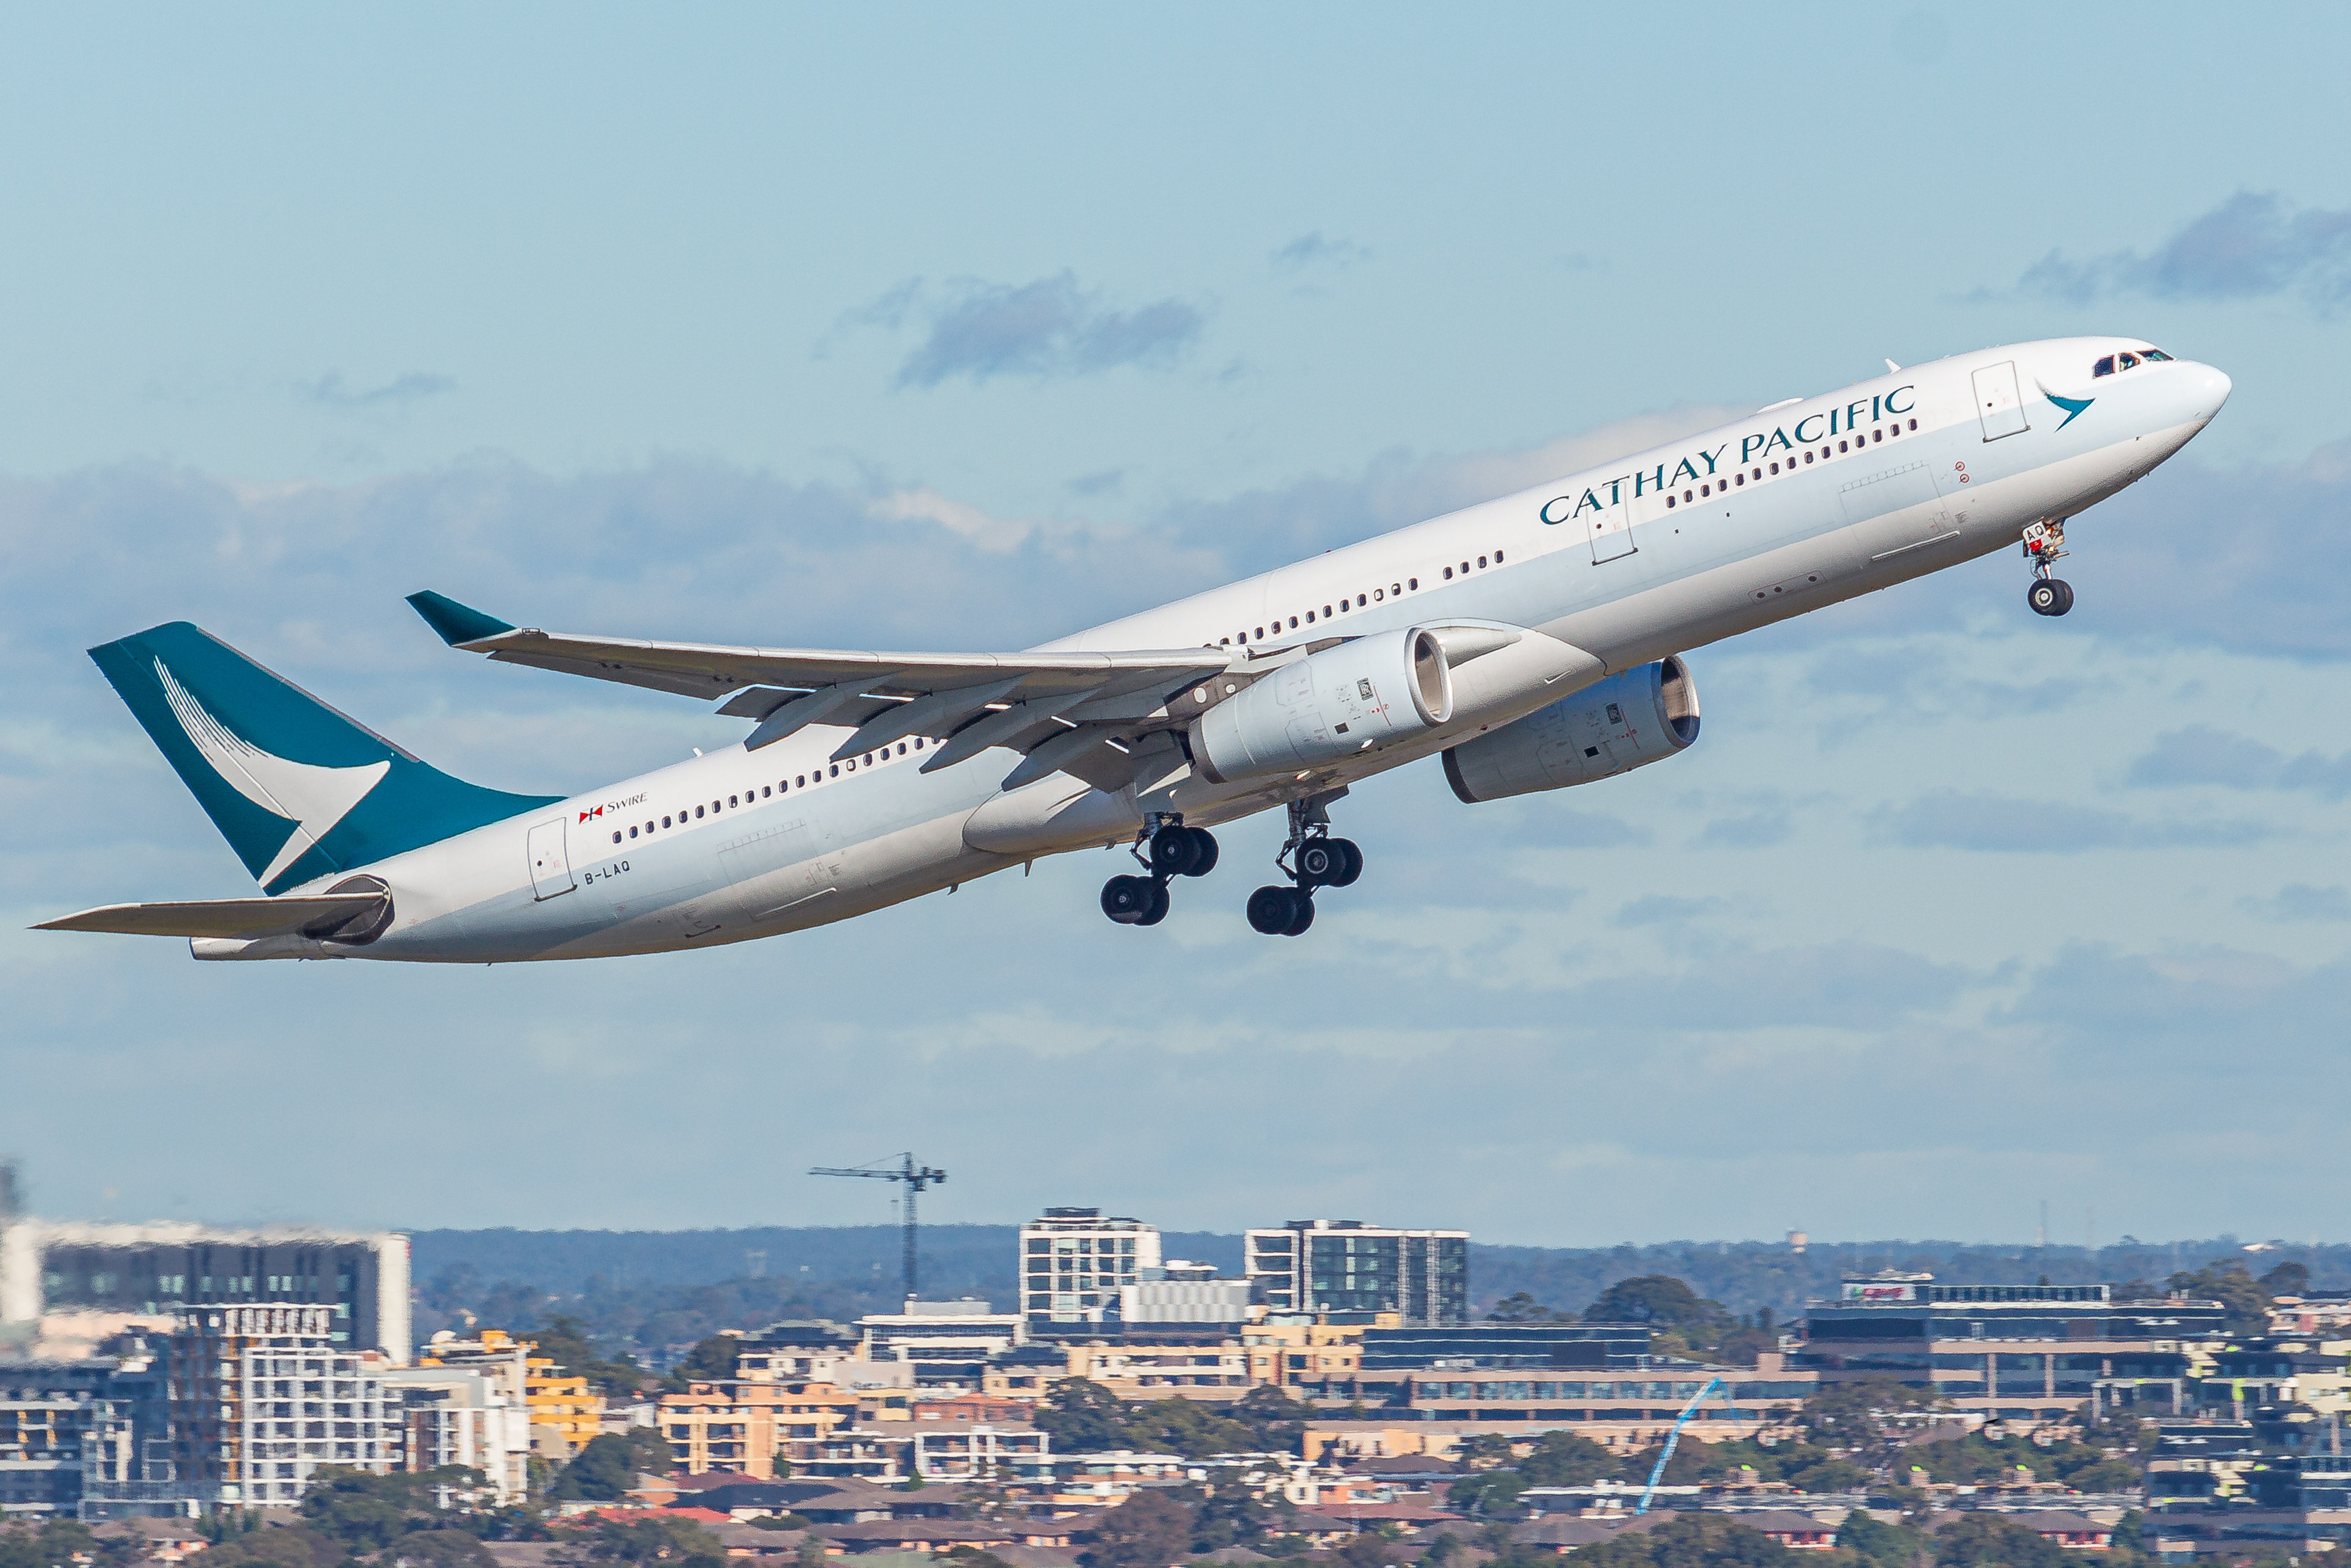 Cathay Pacific Airbus A330